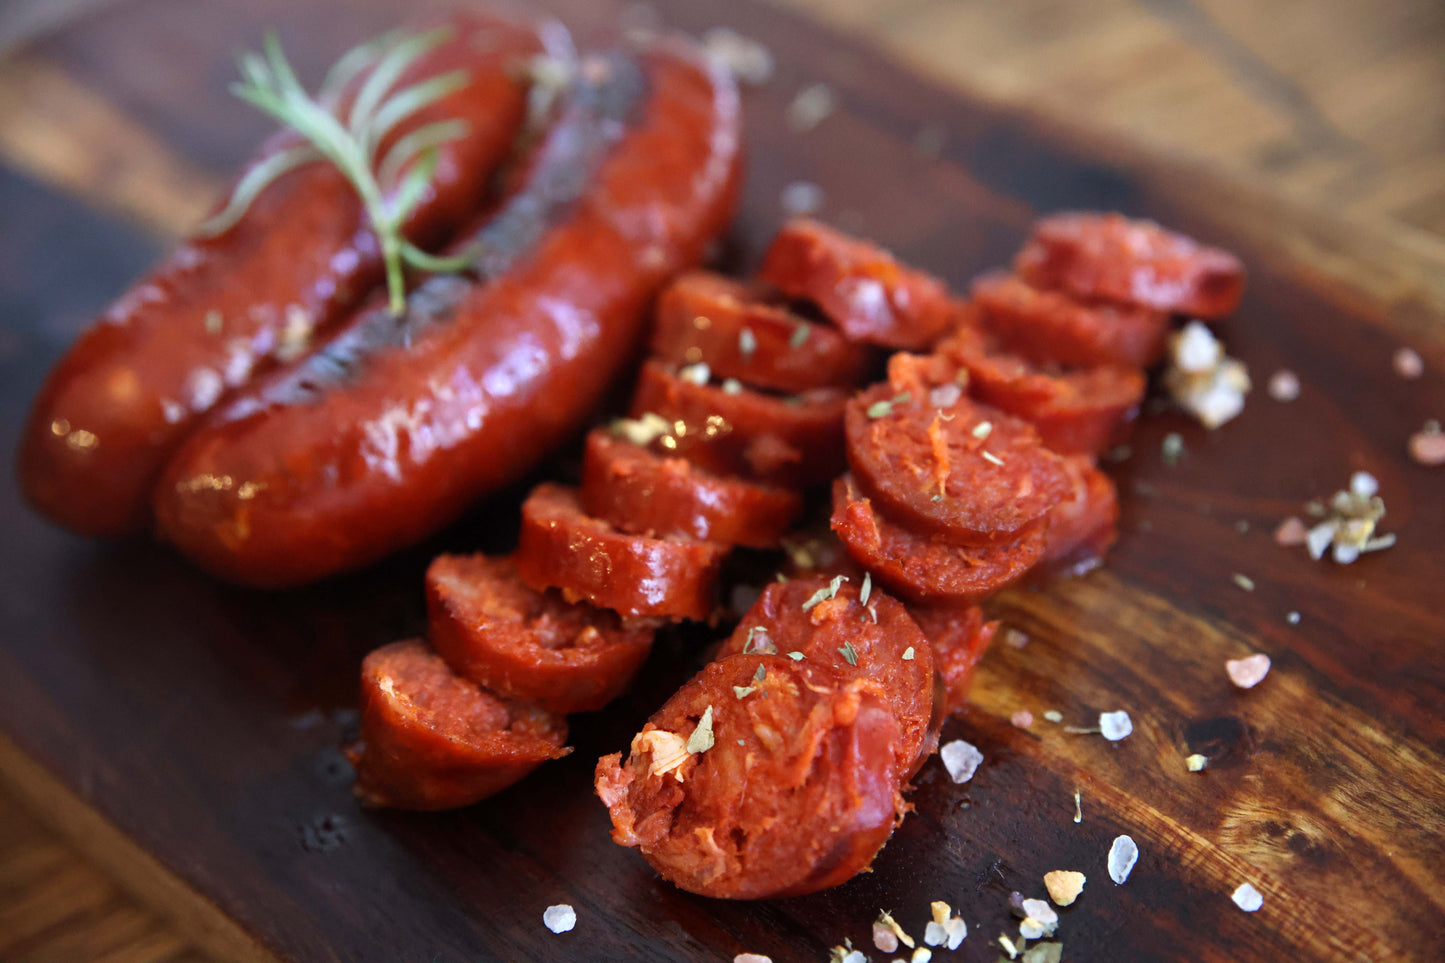 Artisan Traditional Chorizo 4 piece pack random weight approx 400g packet. Regular price $10.00 AUD [You are guaranteed to receive at least 390g of product, equivalent price of $25.64 per kg.]